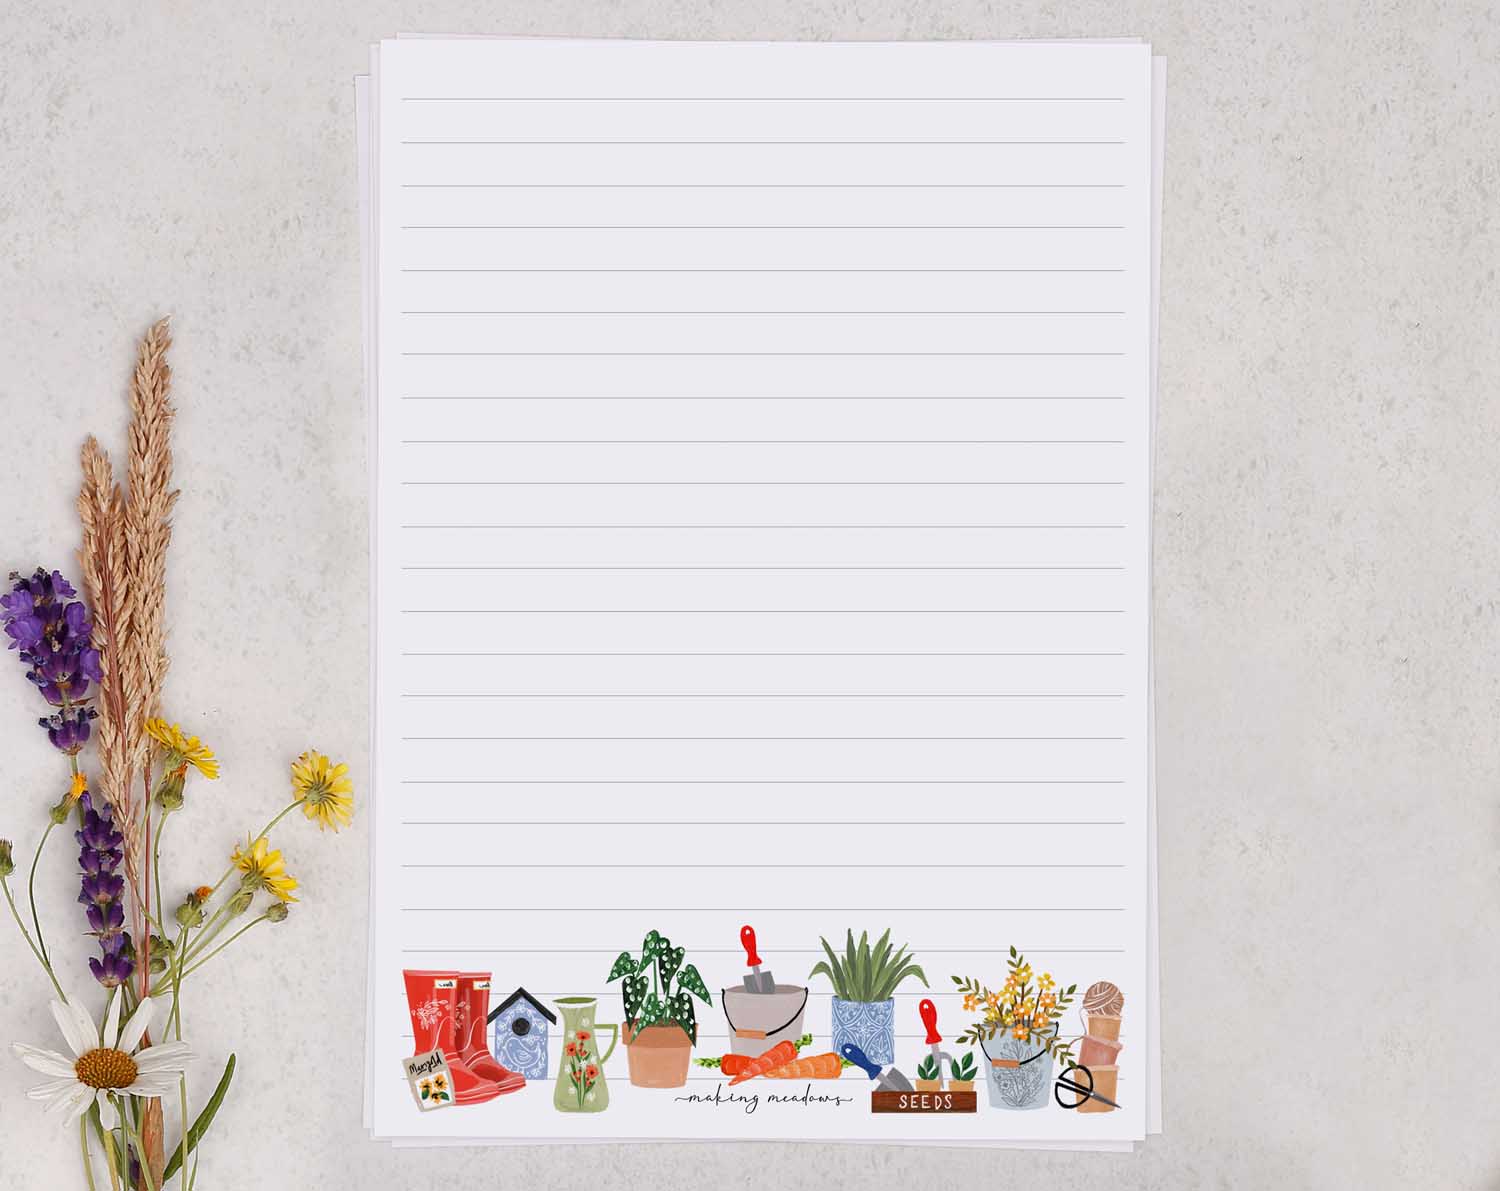 floral garden tool A5 writing paper set comes with matching envelopes